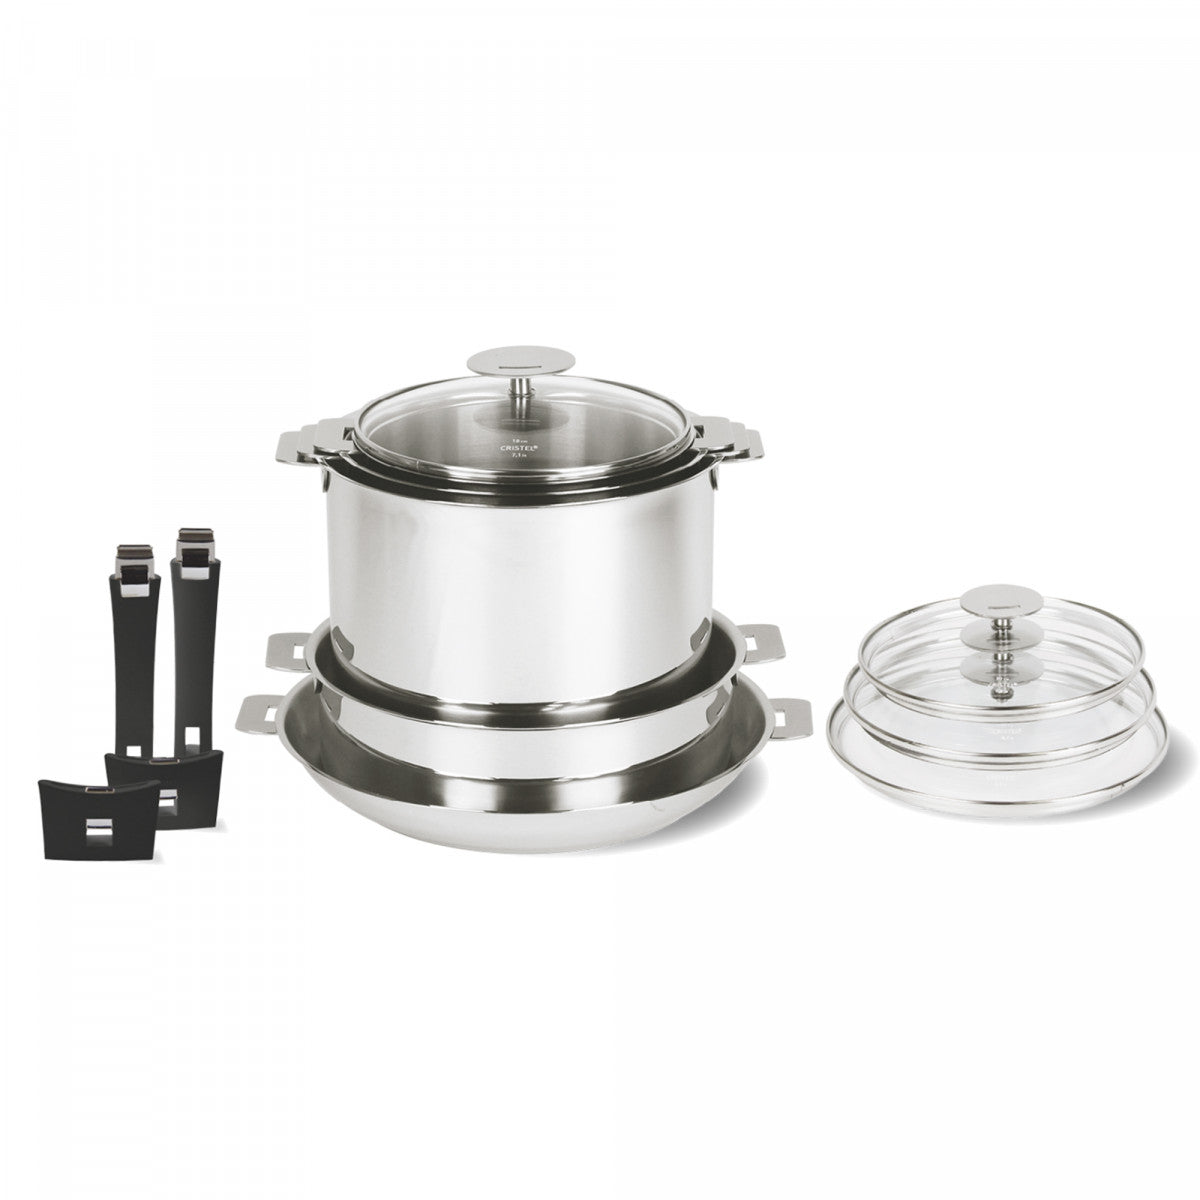 Cristel Strate 18/10 Stainless Steel 13 Piece Cookware Set with Removable  Handles